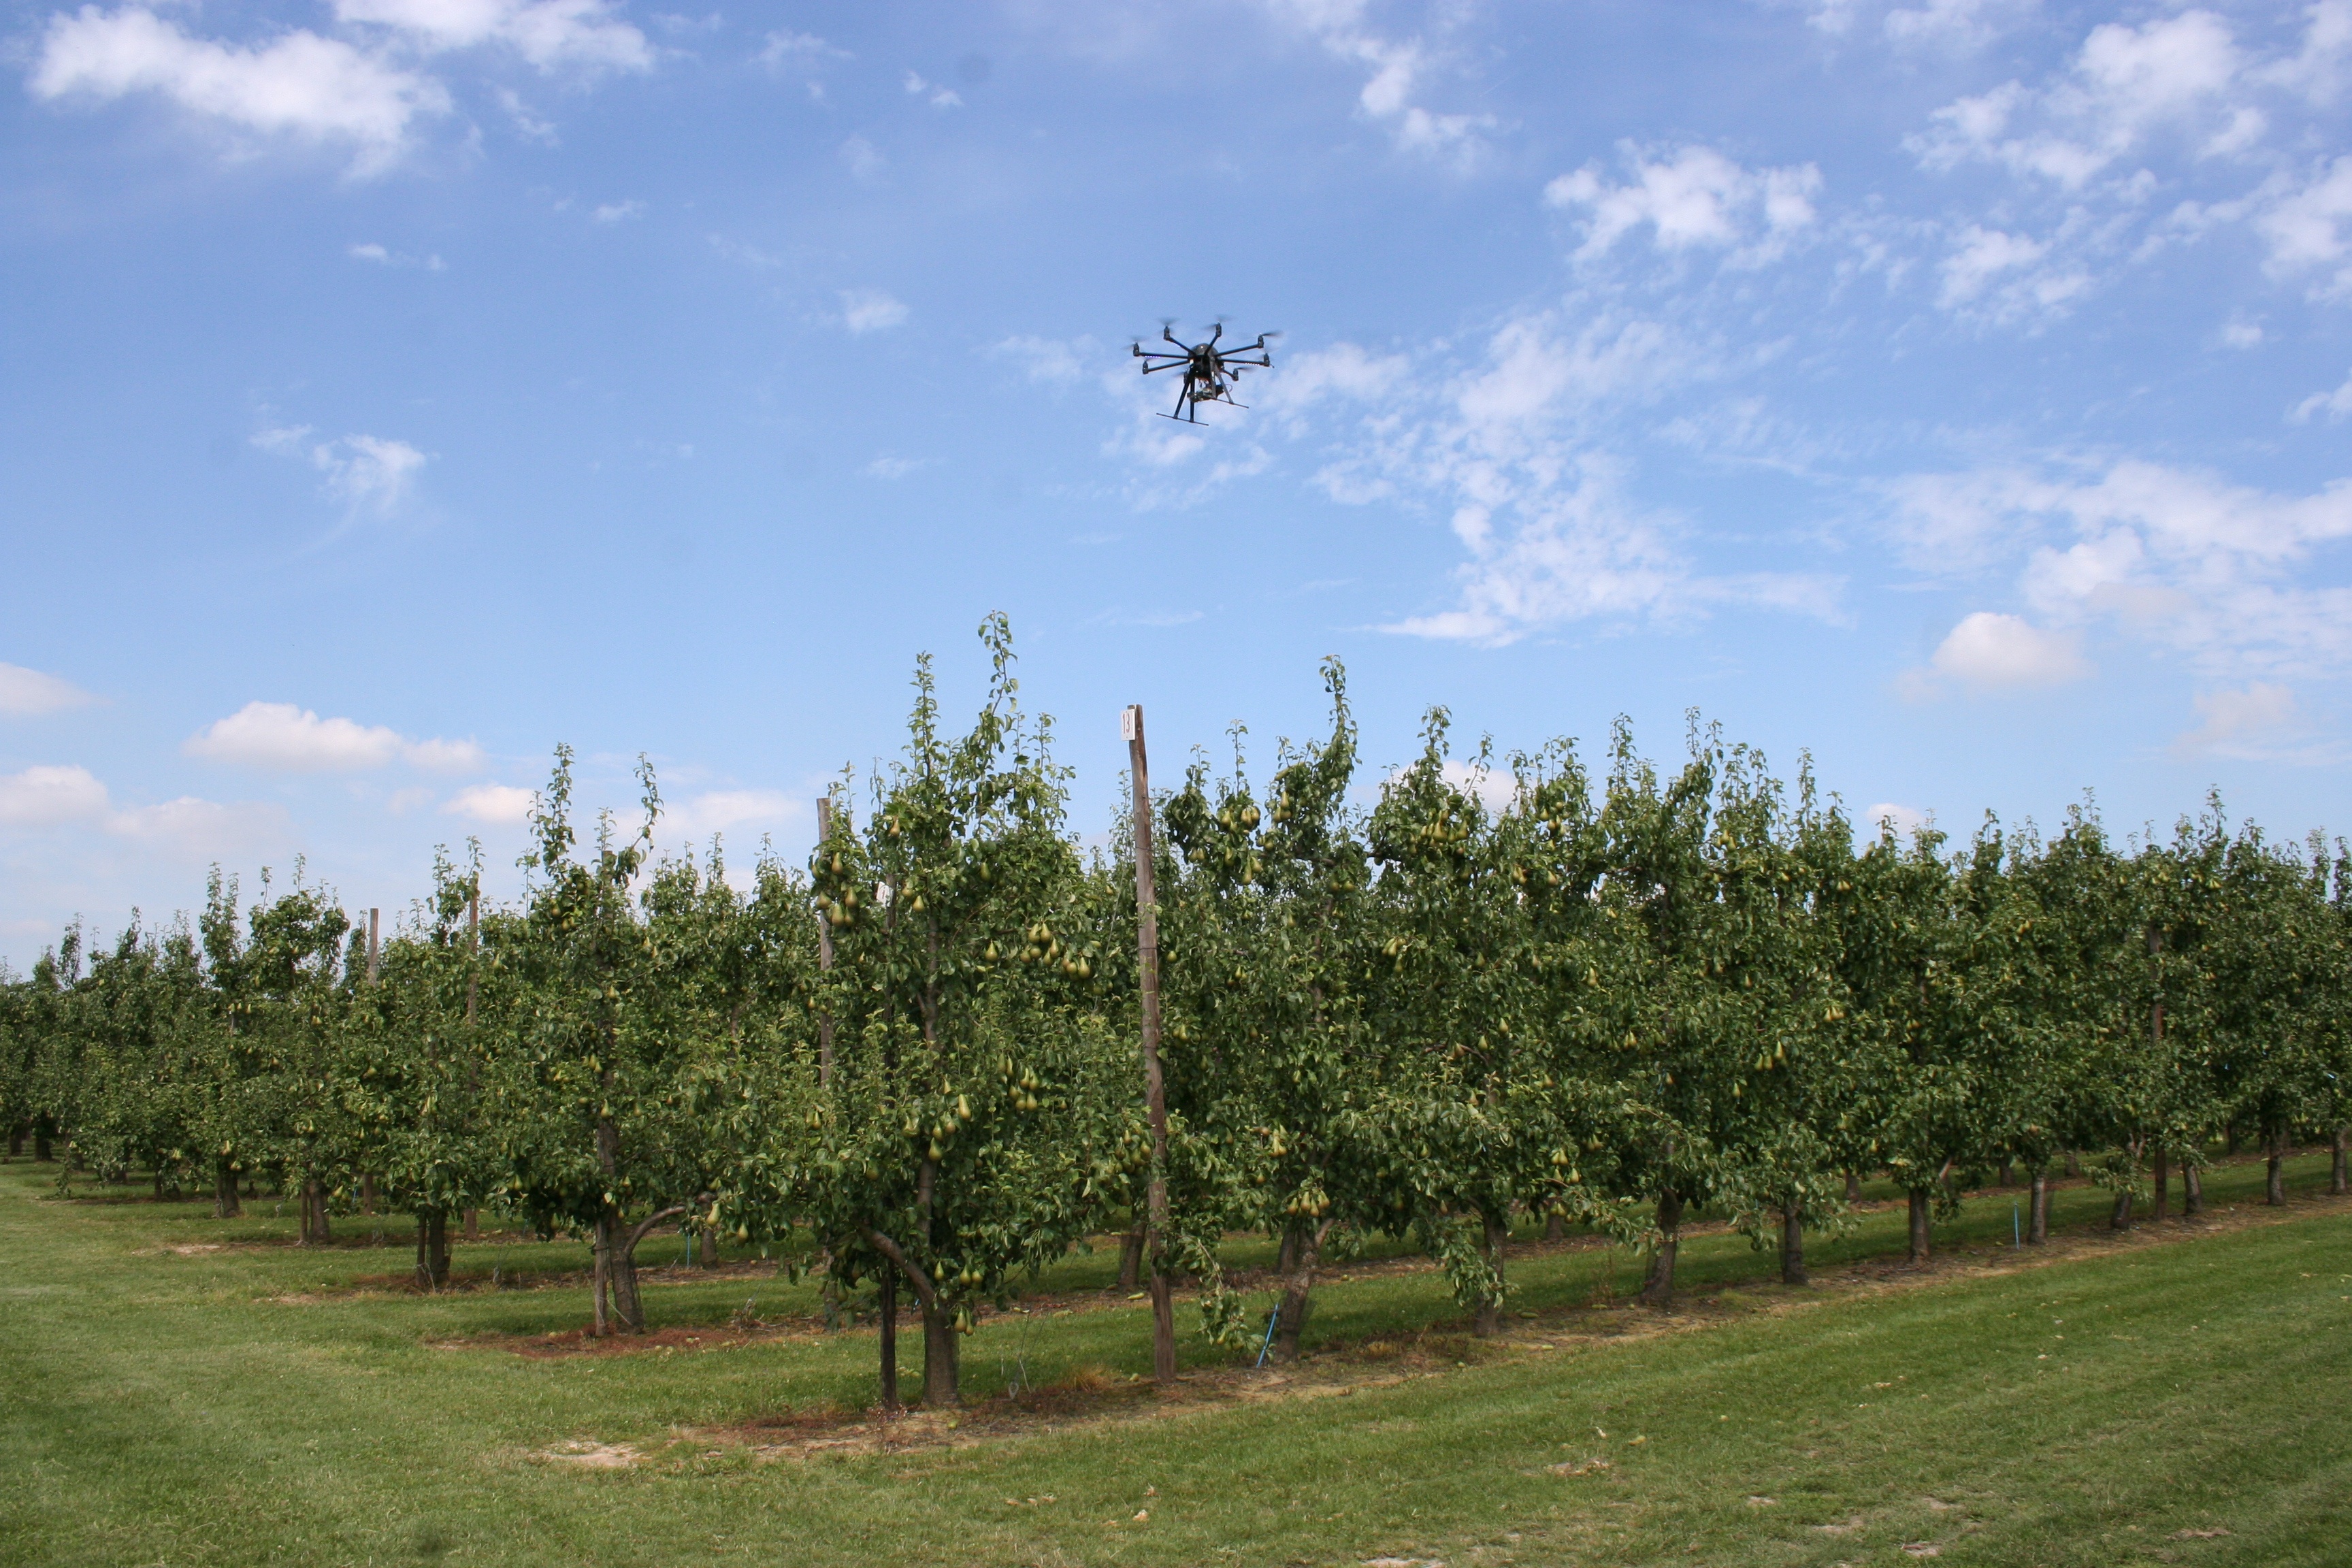 Drones for early fire blight detection